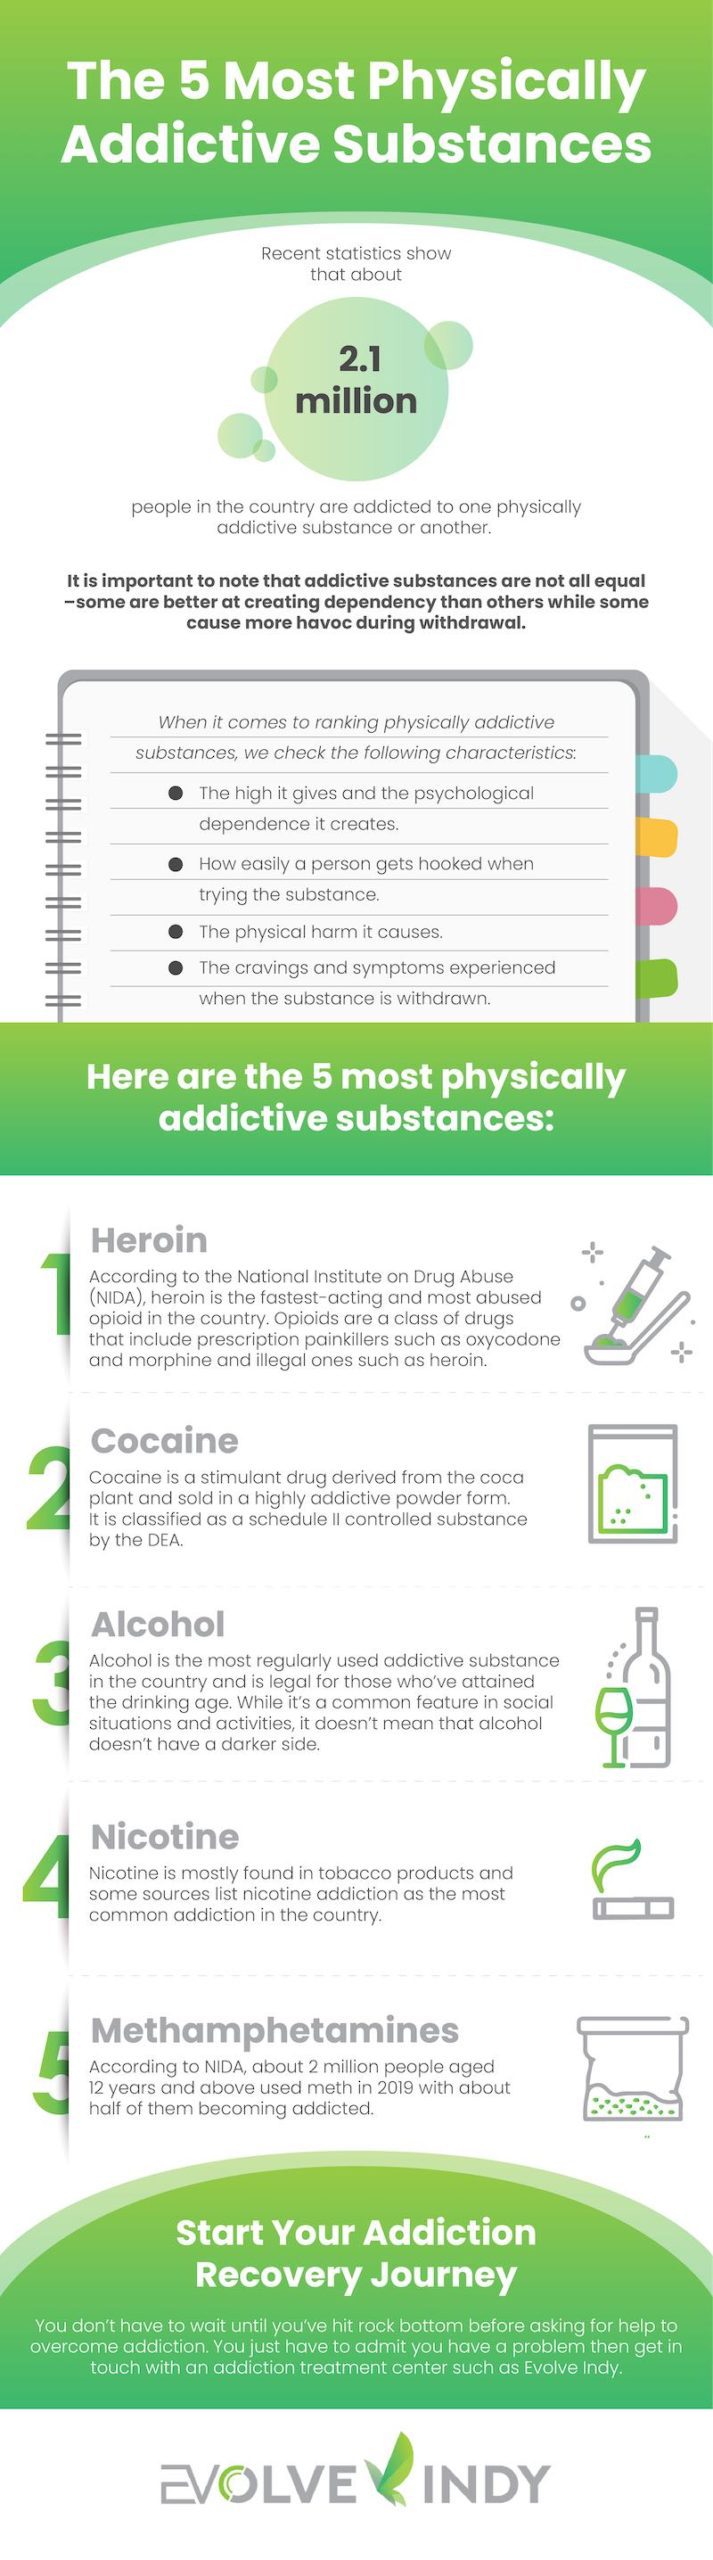 The 5 Most Physically Addictive Substances Infographic 0 800 scaled